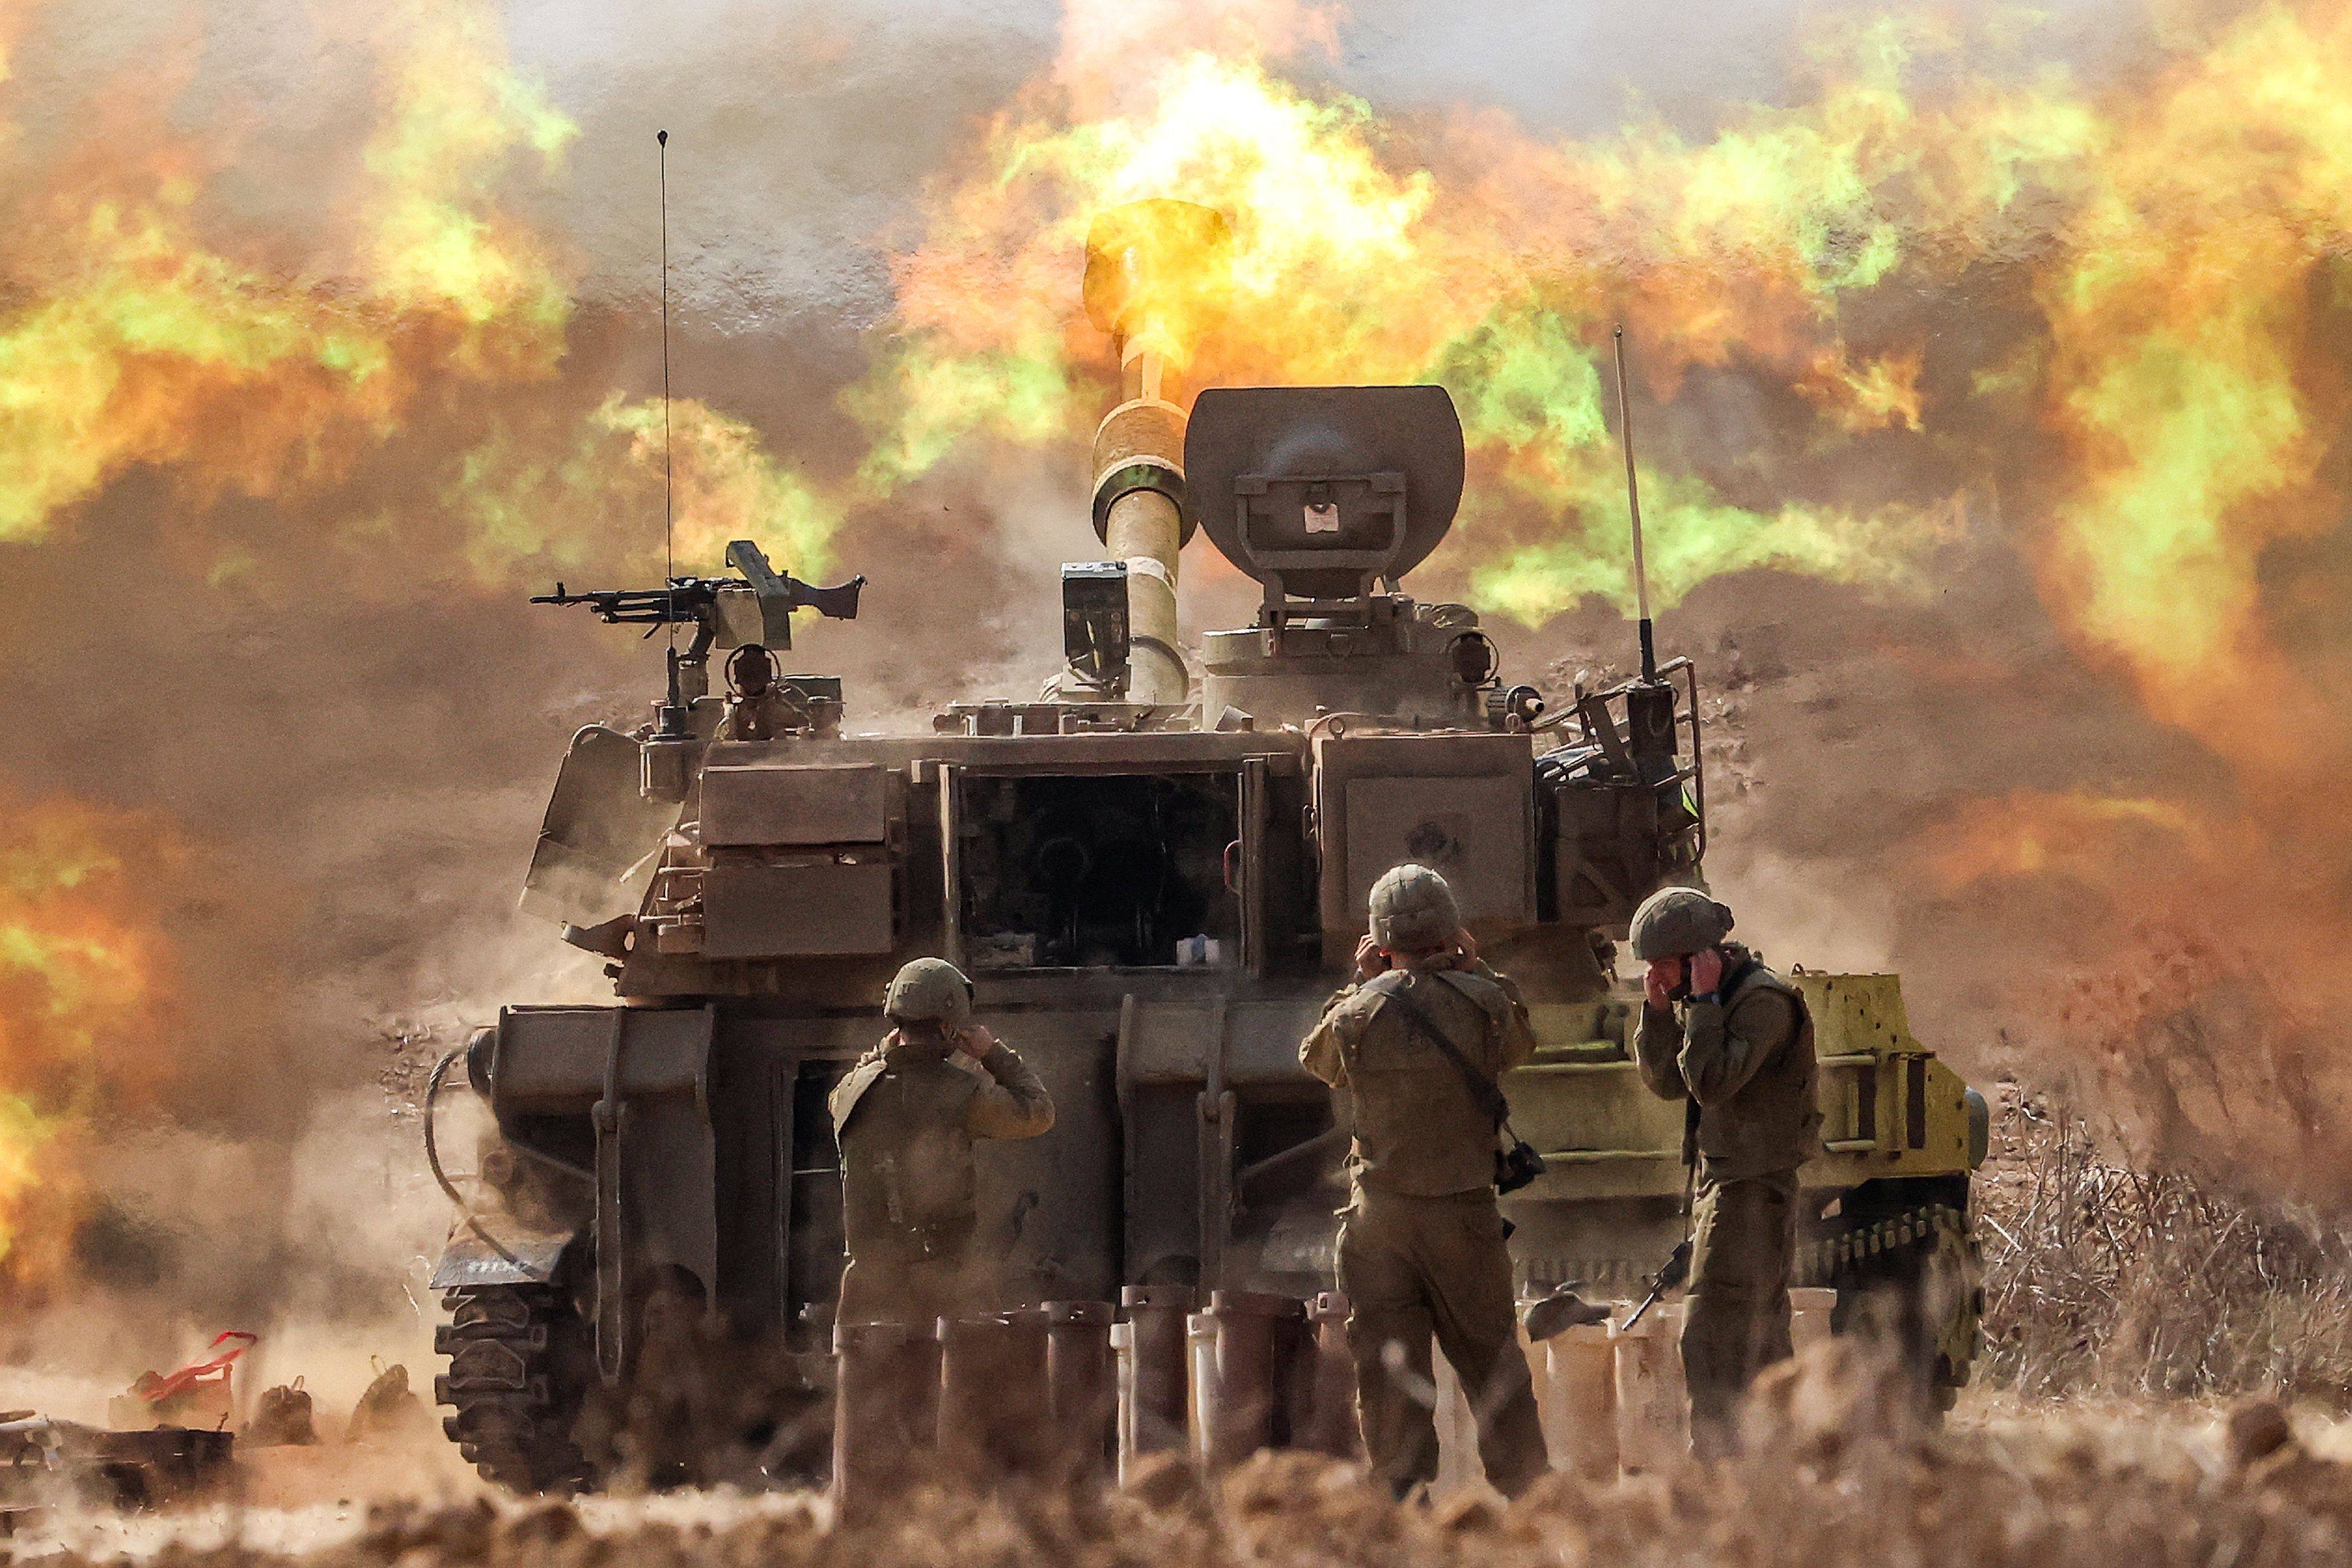 An Israeli army self-propelled howitzer fires rounds near the border with Gaza in southern Israel. Photo: AFP